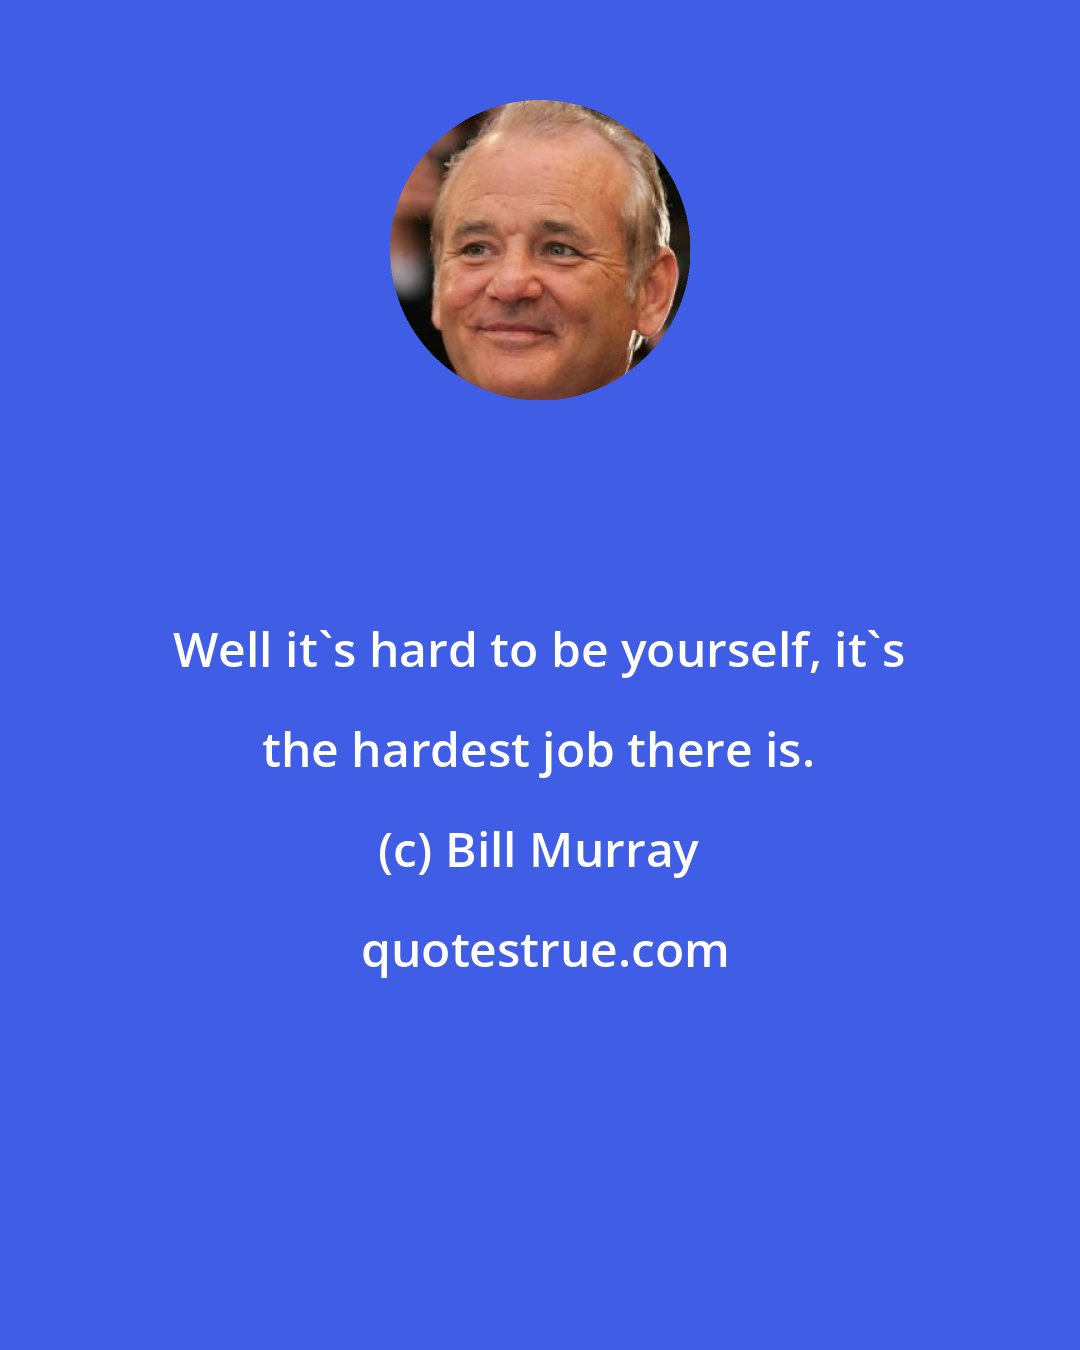 Bill Murray: Well it's hard to be yourself, it's the hardest job there is.